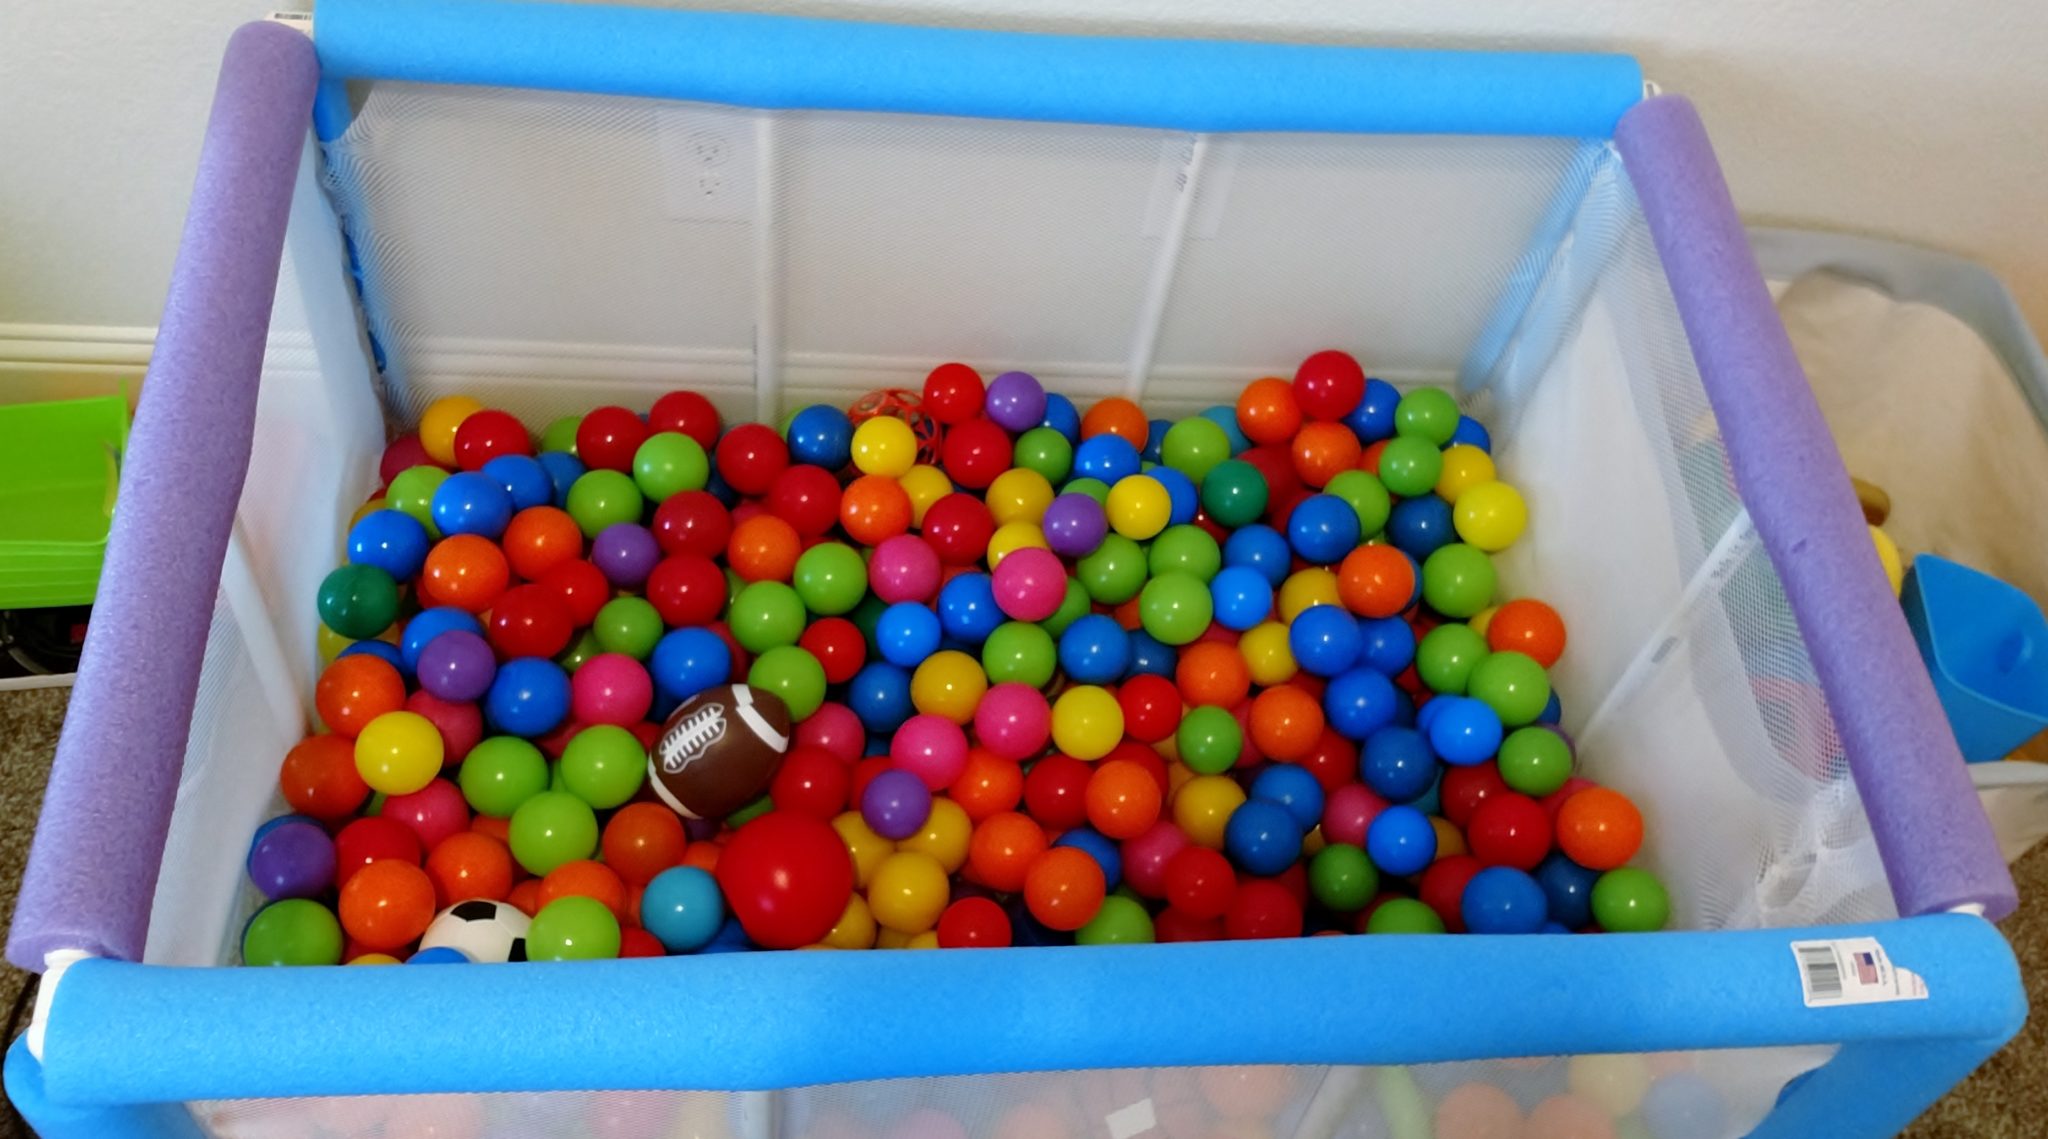 finished DIY ball pit with PVC pipes